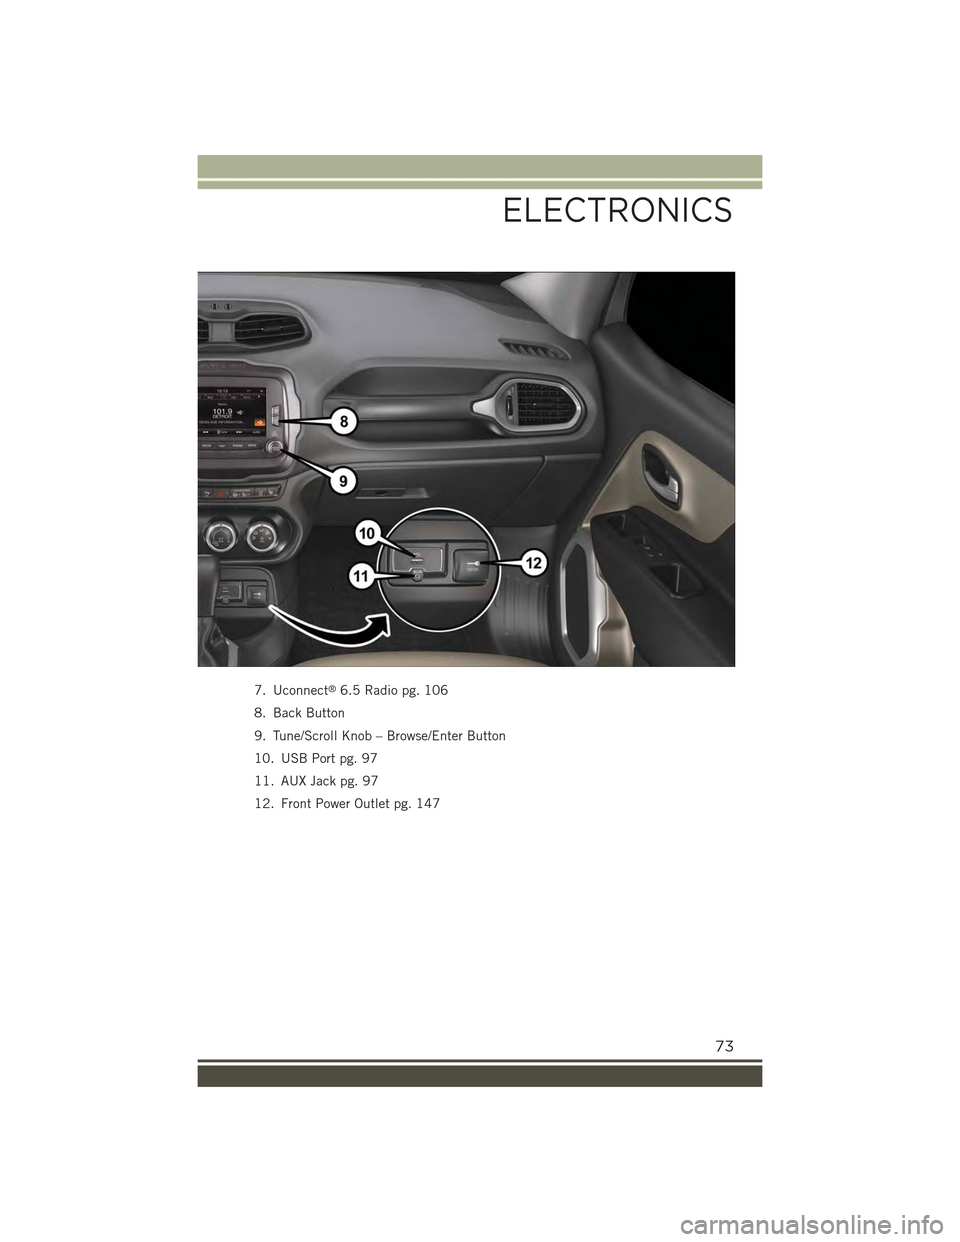 JEEP RENEGADE 2015 1.G User Guide 7. Uconnect®6.5 Radio pg. 106
8. Back Button
9. Tune/Scroll Knob – Browse/Enter Button
10. USB Port pg. 97
11. AUX Jack pg. 97
12. Front Power Outlet pg. 147
ELECTRONICS
73 